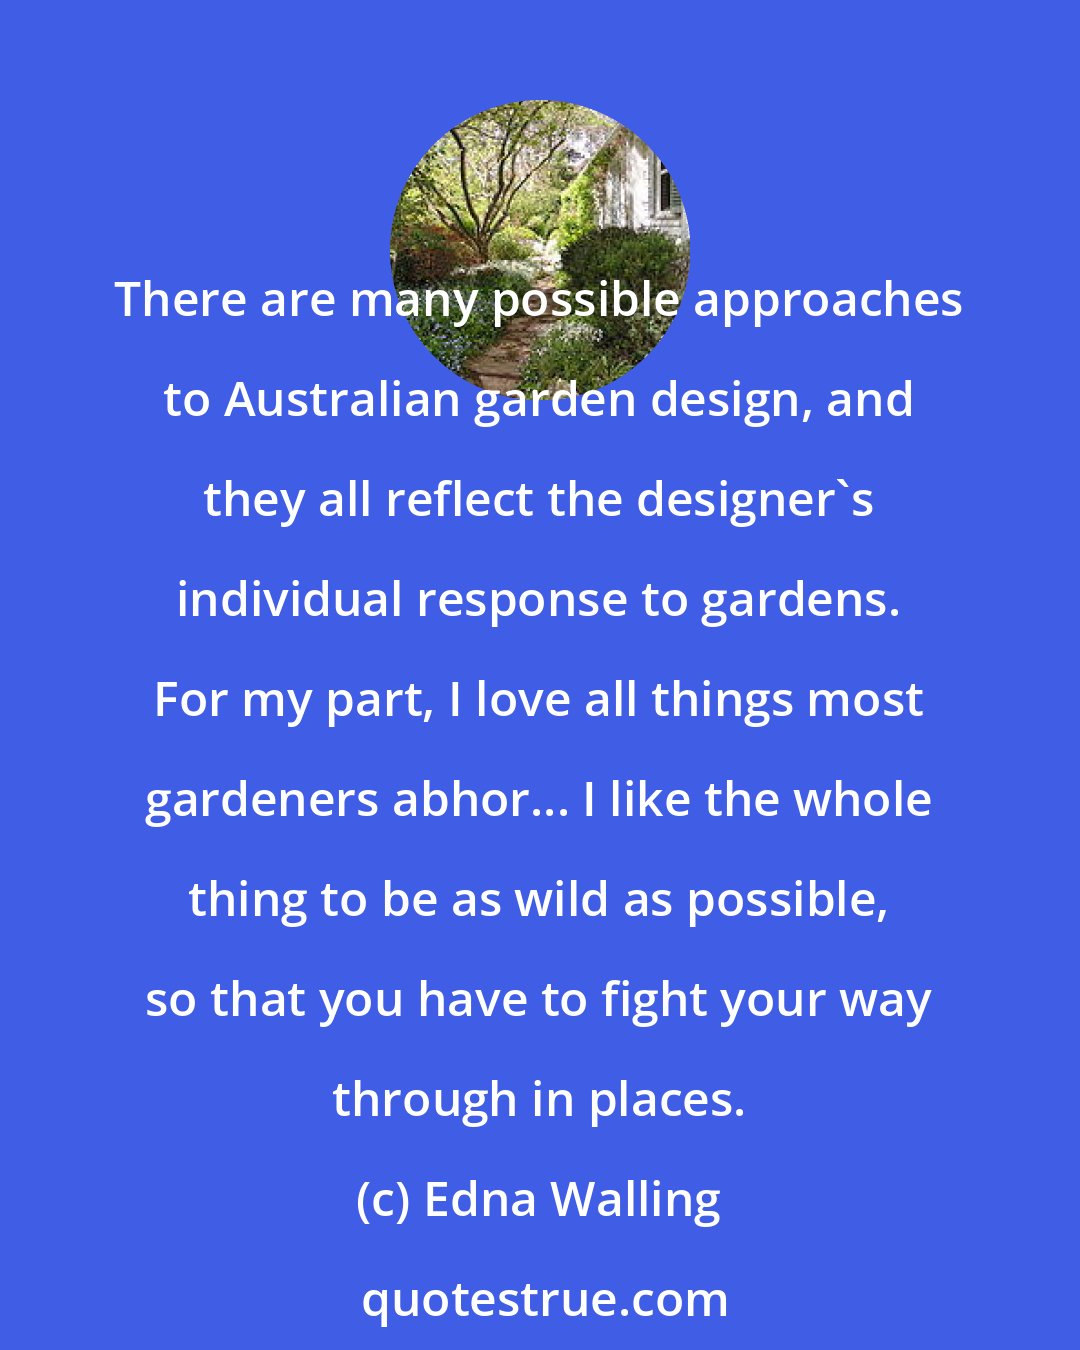 Edna Walling: There are many possible approaches to Australian garden design, and they all reflect the designer's individual response to gardens. For my part, I love all things most gardeners abhor... I like the whole thing to be as wild as possible, so that you have to fight your way through in places.